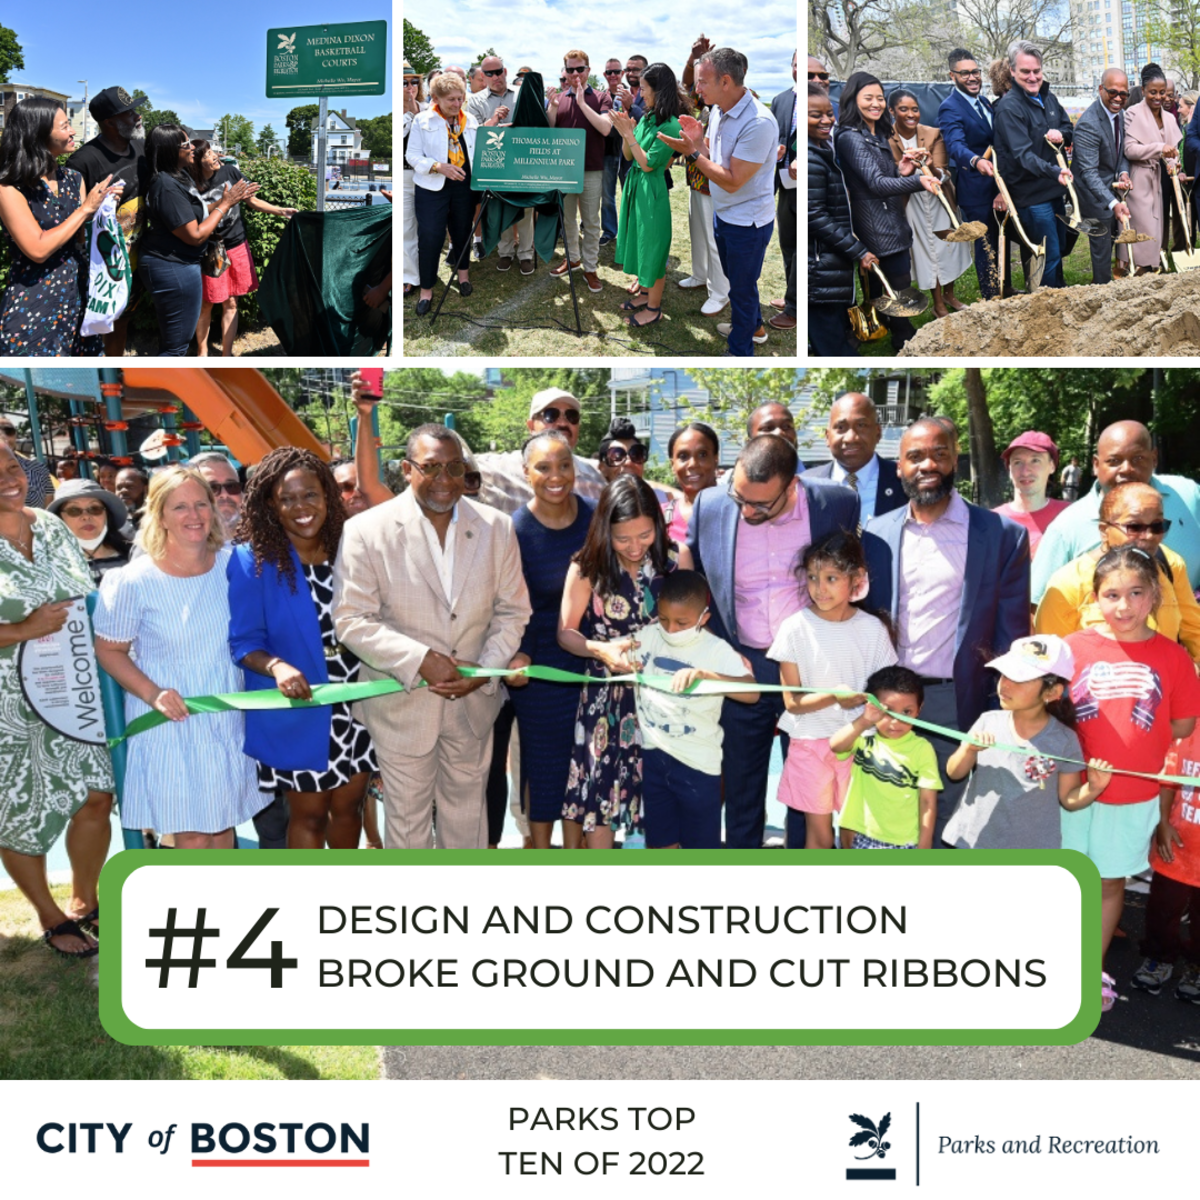 Parks Top Ten of 2022 #4 Design and construction broke ground and cut ribbons. Grid. groups of people at sign unveilings, digging ground to break earth and cutting ribbon at park openings.